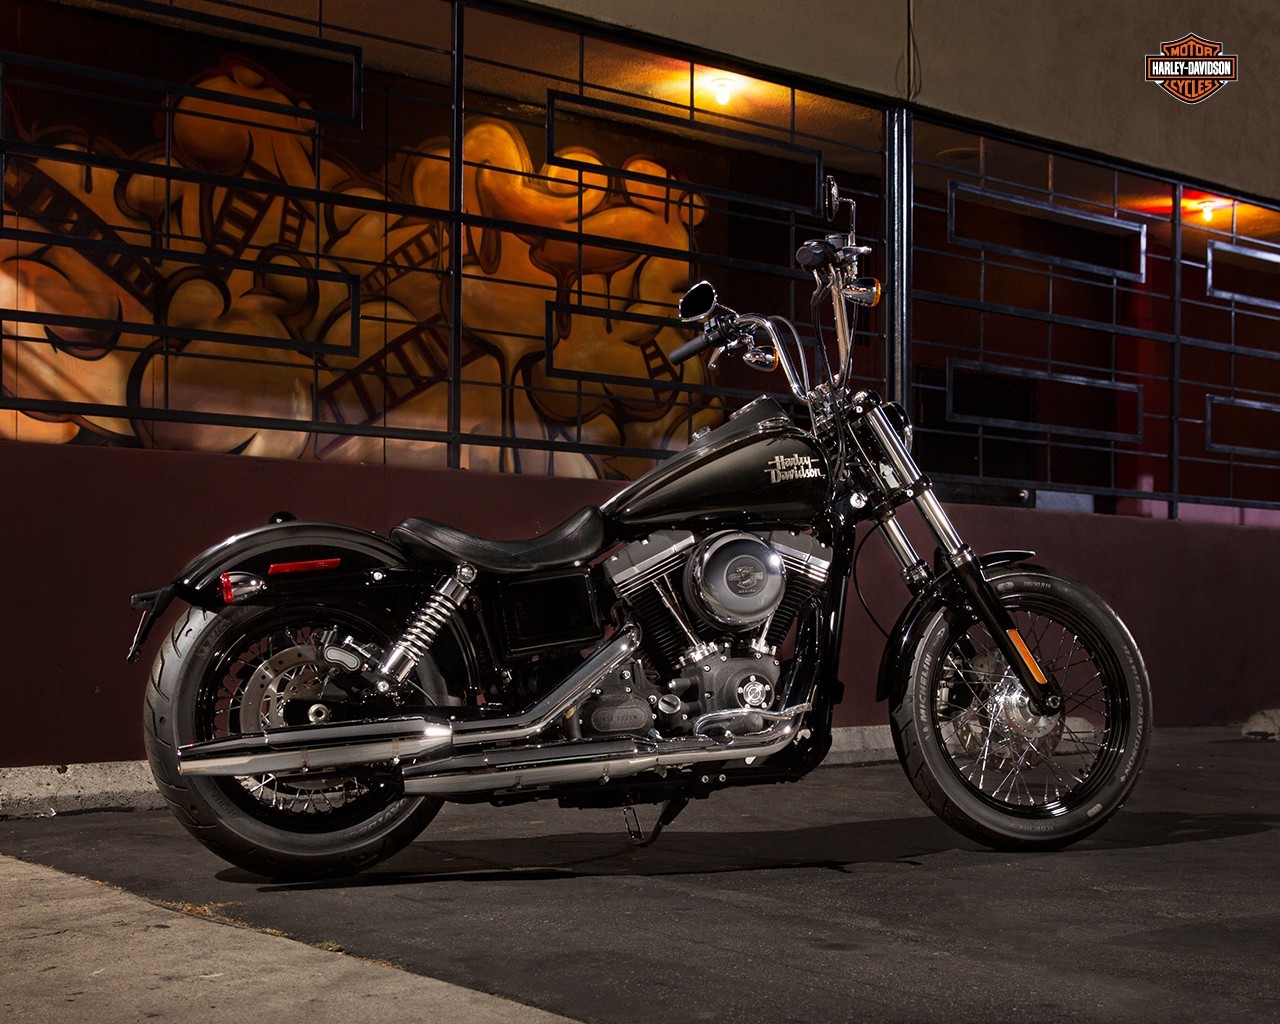 Harley Davidson Wallpaper For iPhone Hq Background HD